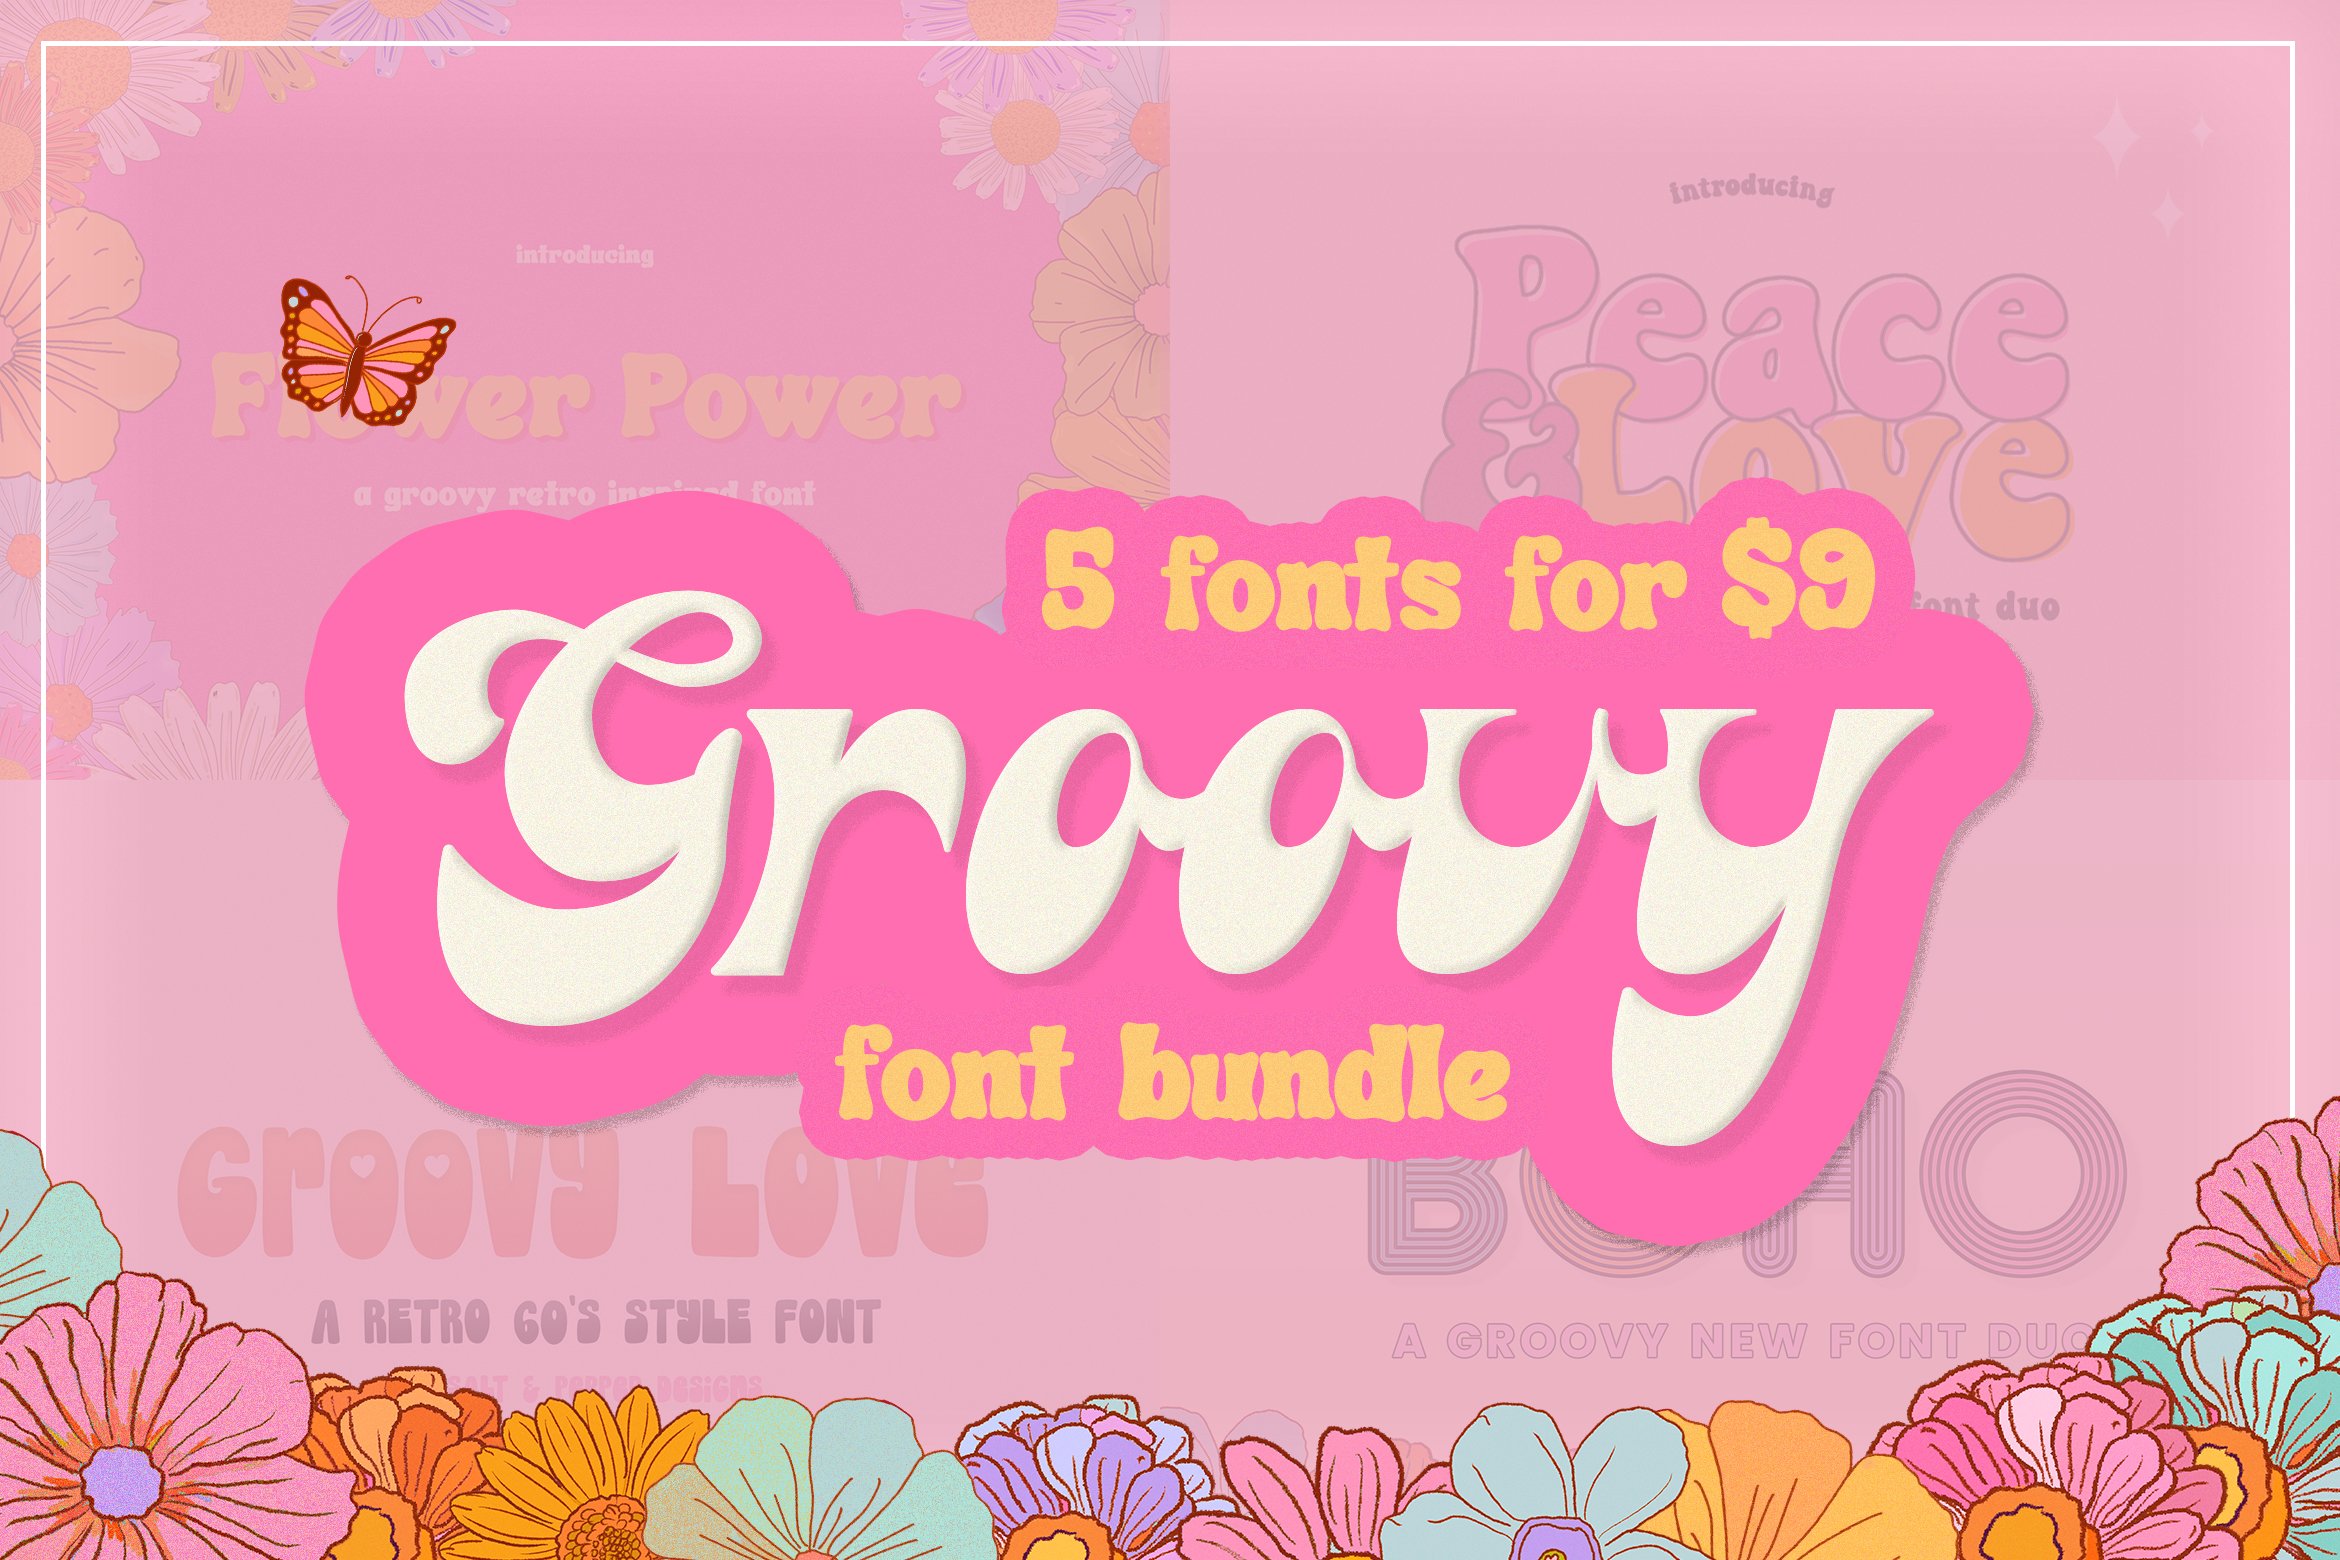 The Groovy Font Bundle (ONLY $9) cover image.